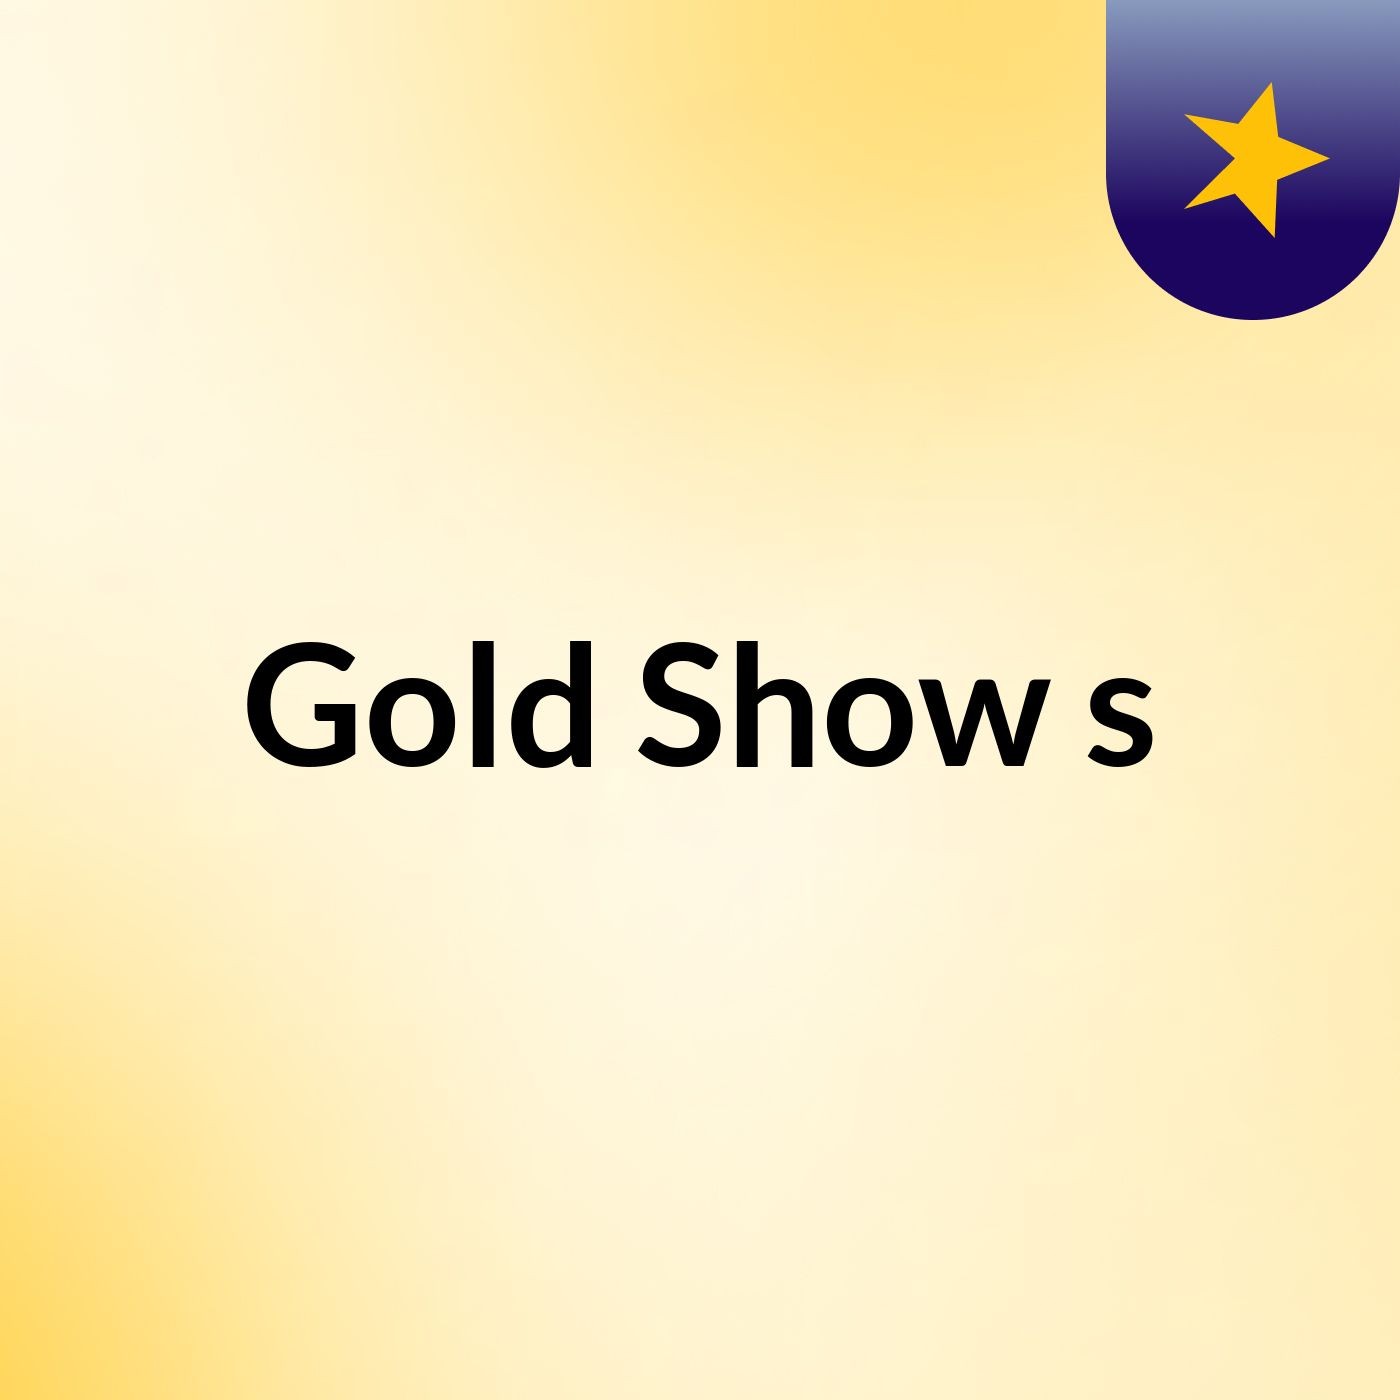 Gold Show's